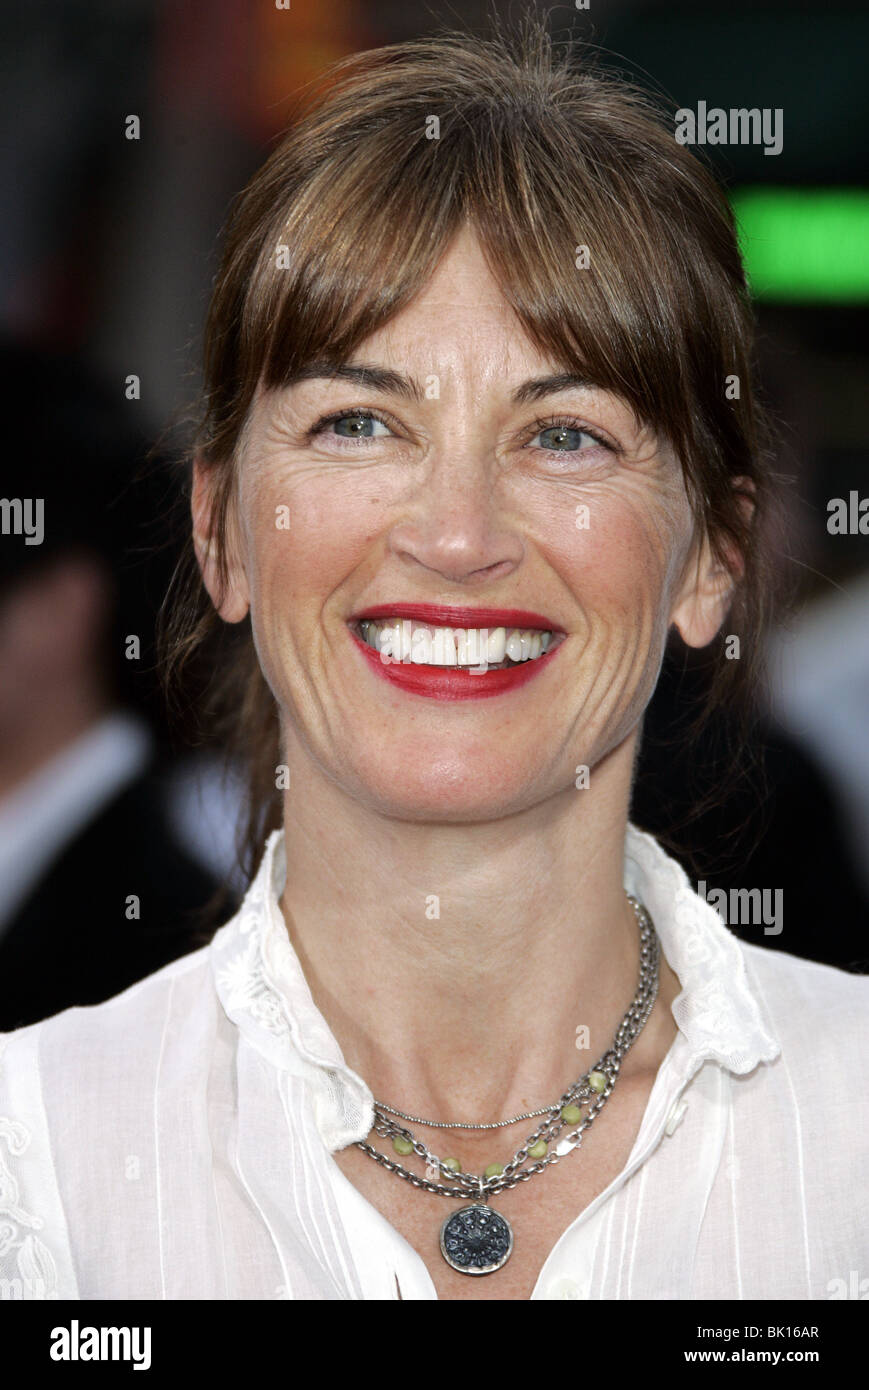 Amanda pays actress High Resolution Stock Photography and Images - Alamy